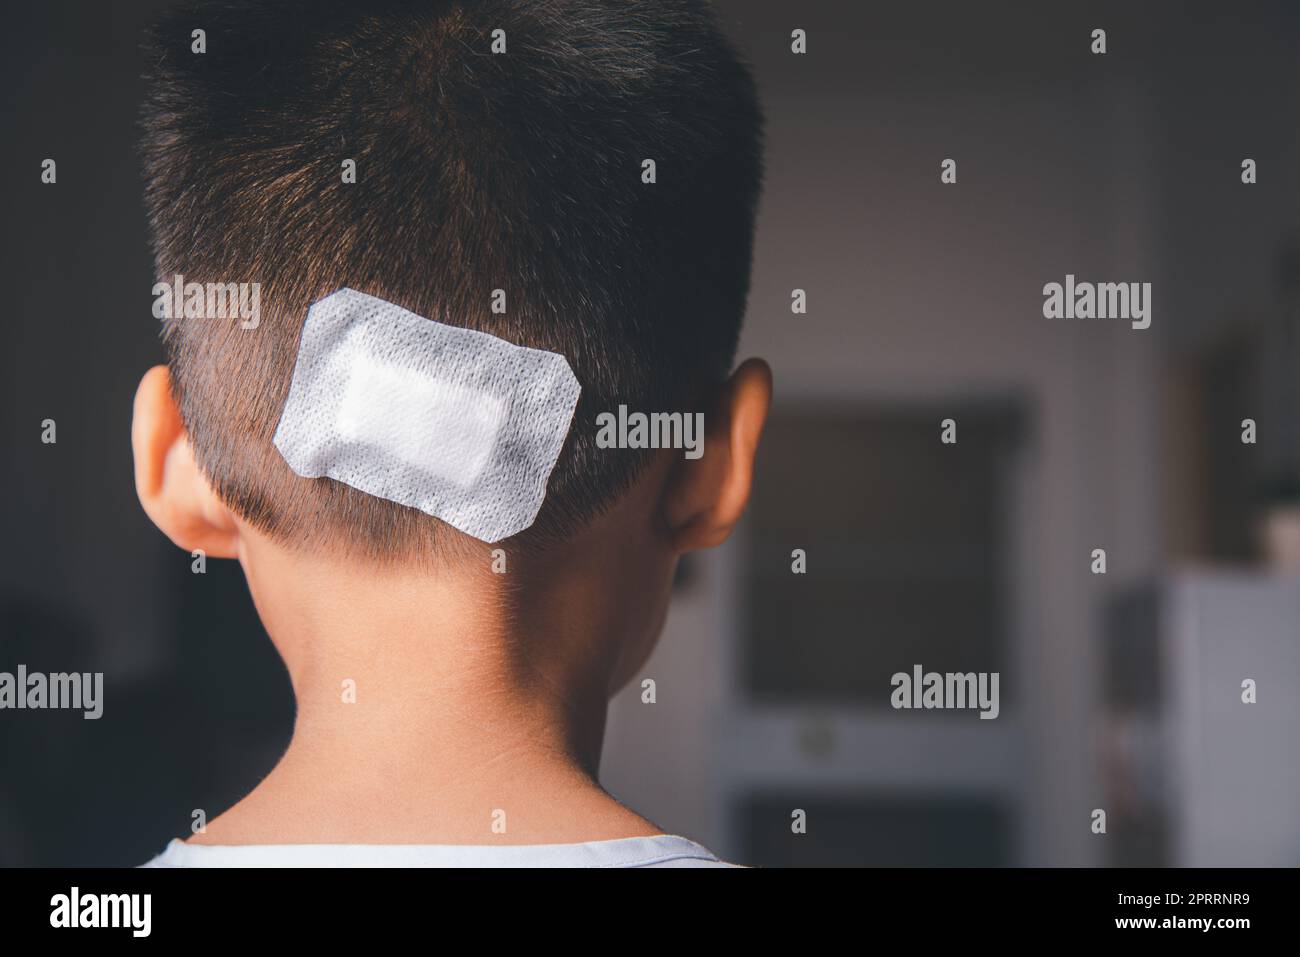 The lacerated suture wound of kid back head which suture with trauma the head by medical bandage Stock Photo